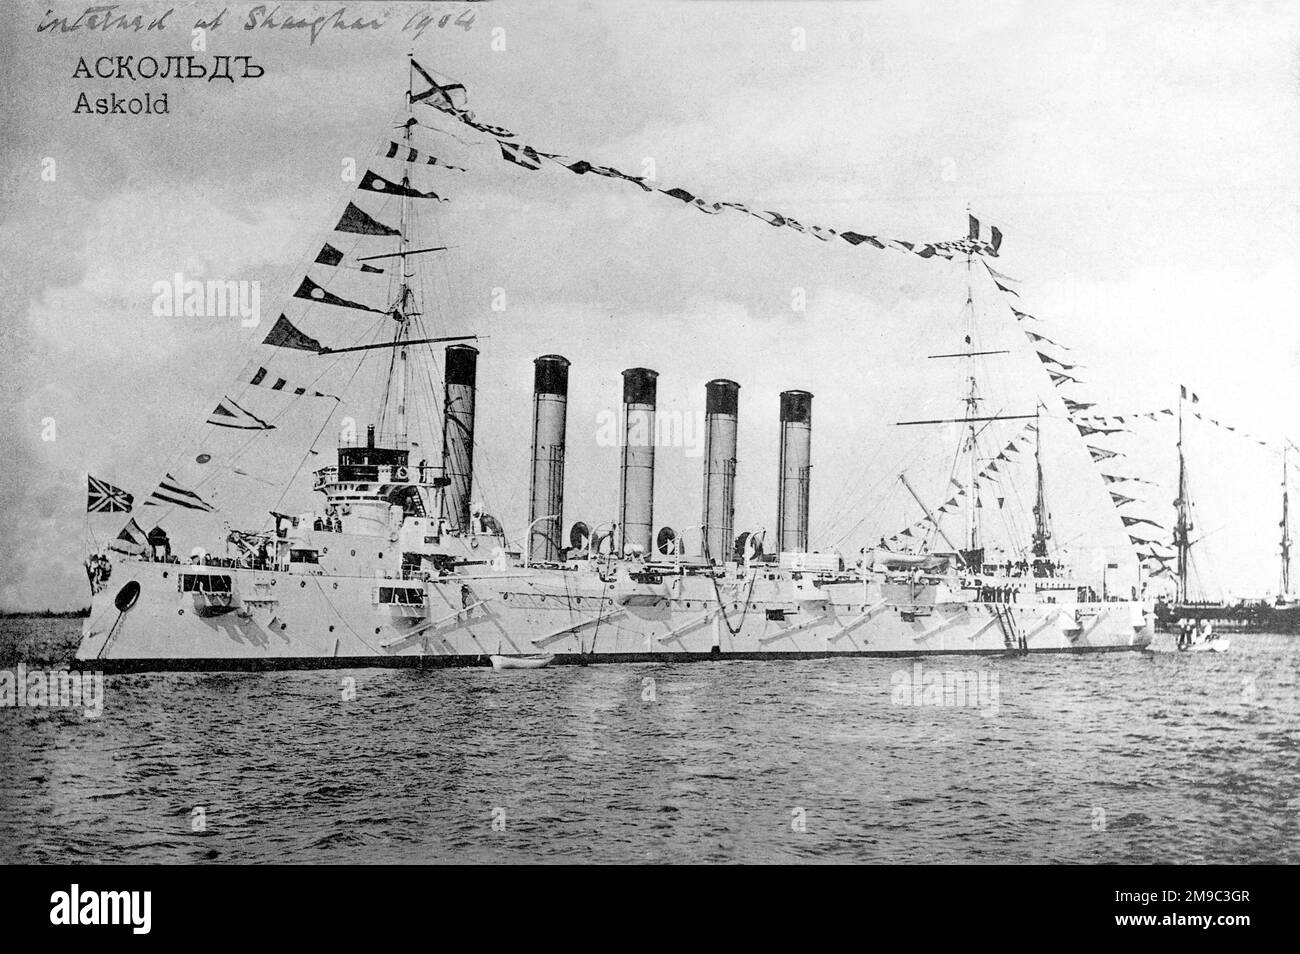 Imperial Russian Navy - HIMS Askold, a protected cruiser. This ship was notable for having five funnels and its high turn of speed. During the Russo-Sino war in 1904, Askold was damaged and failed to join with the Pacific fleet from Vladivostok. She was interned at Shanghai until the war ended. Stock Photo